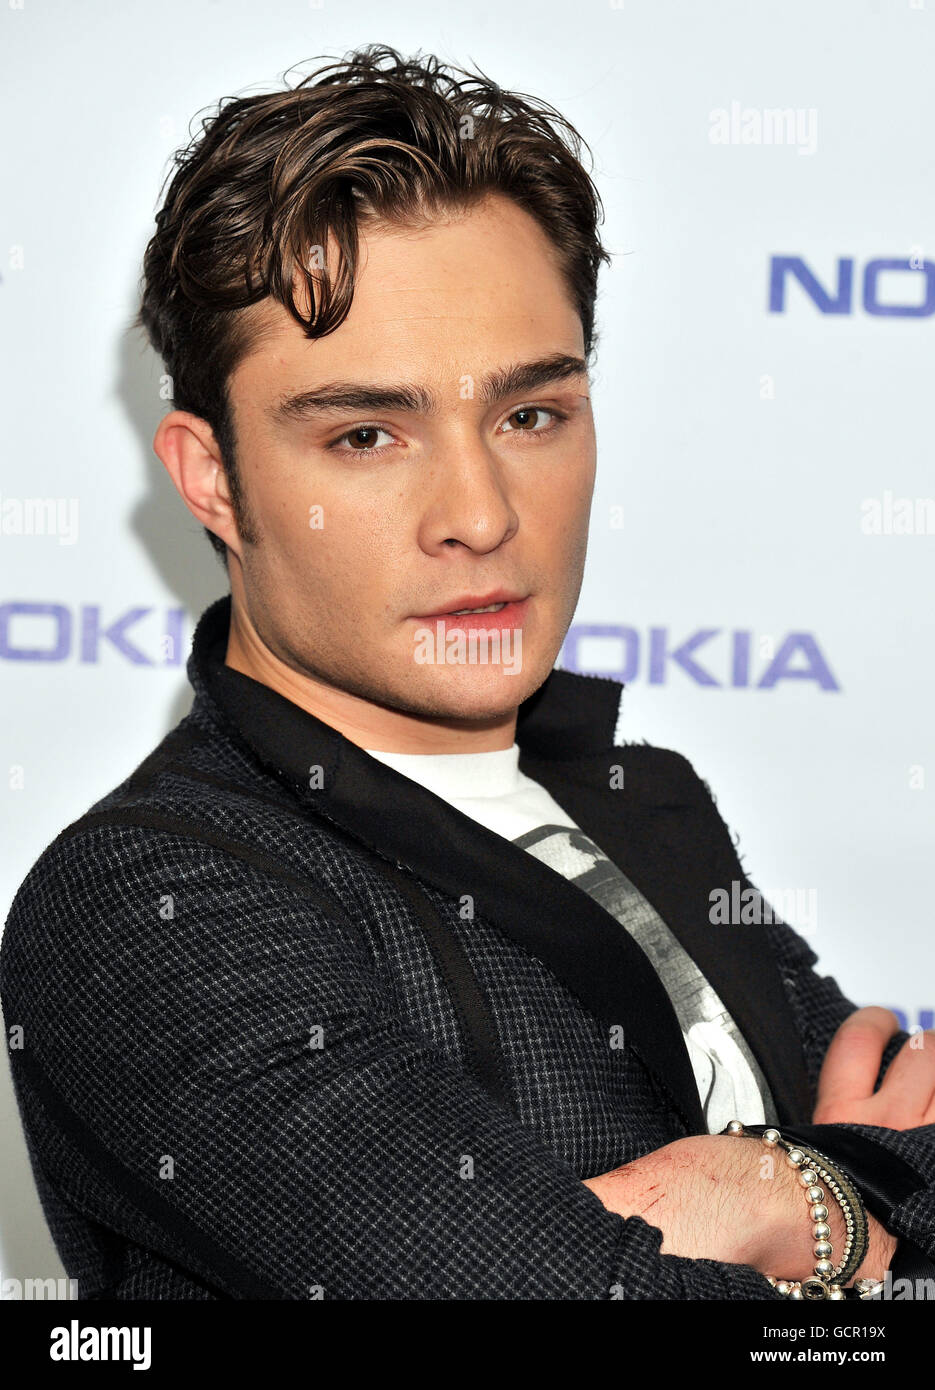 Ed Westwick the British born Actor best known for his work on the 'Gossip Girl' TV show, during a break filming 'The Commuter' a short film shot in high definition, on the new Nokia N8 phone, in central London. Stock Photo